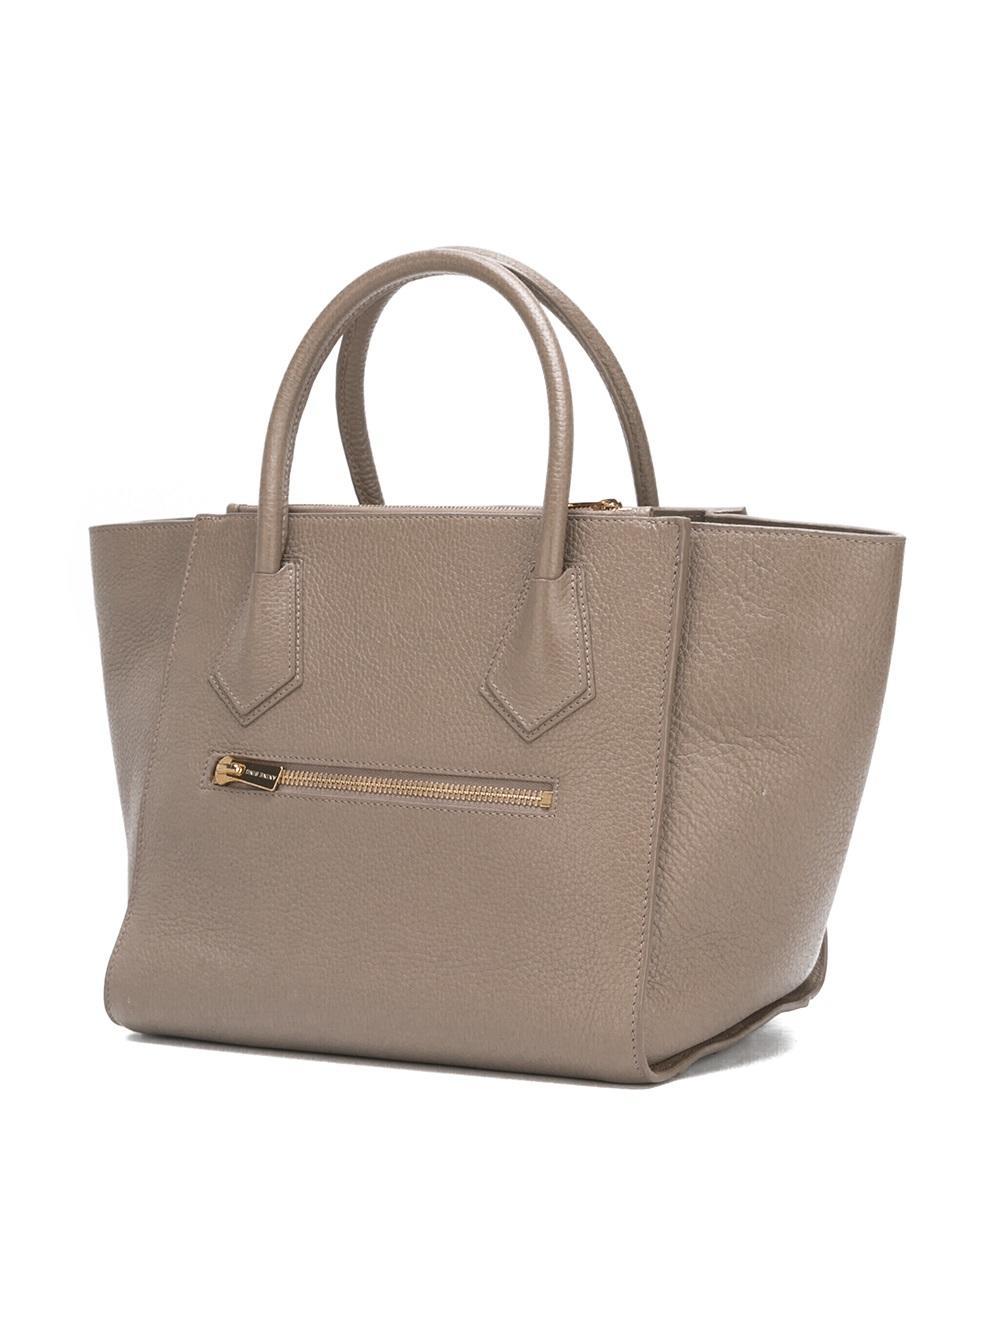 Lyst - Anine Bing 'madison' Tote Bag in Gray